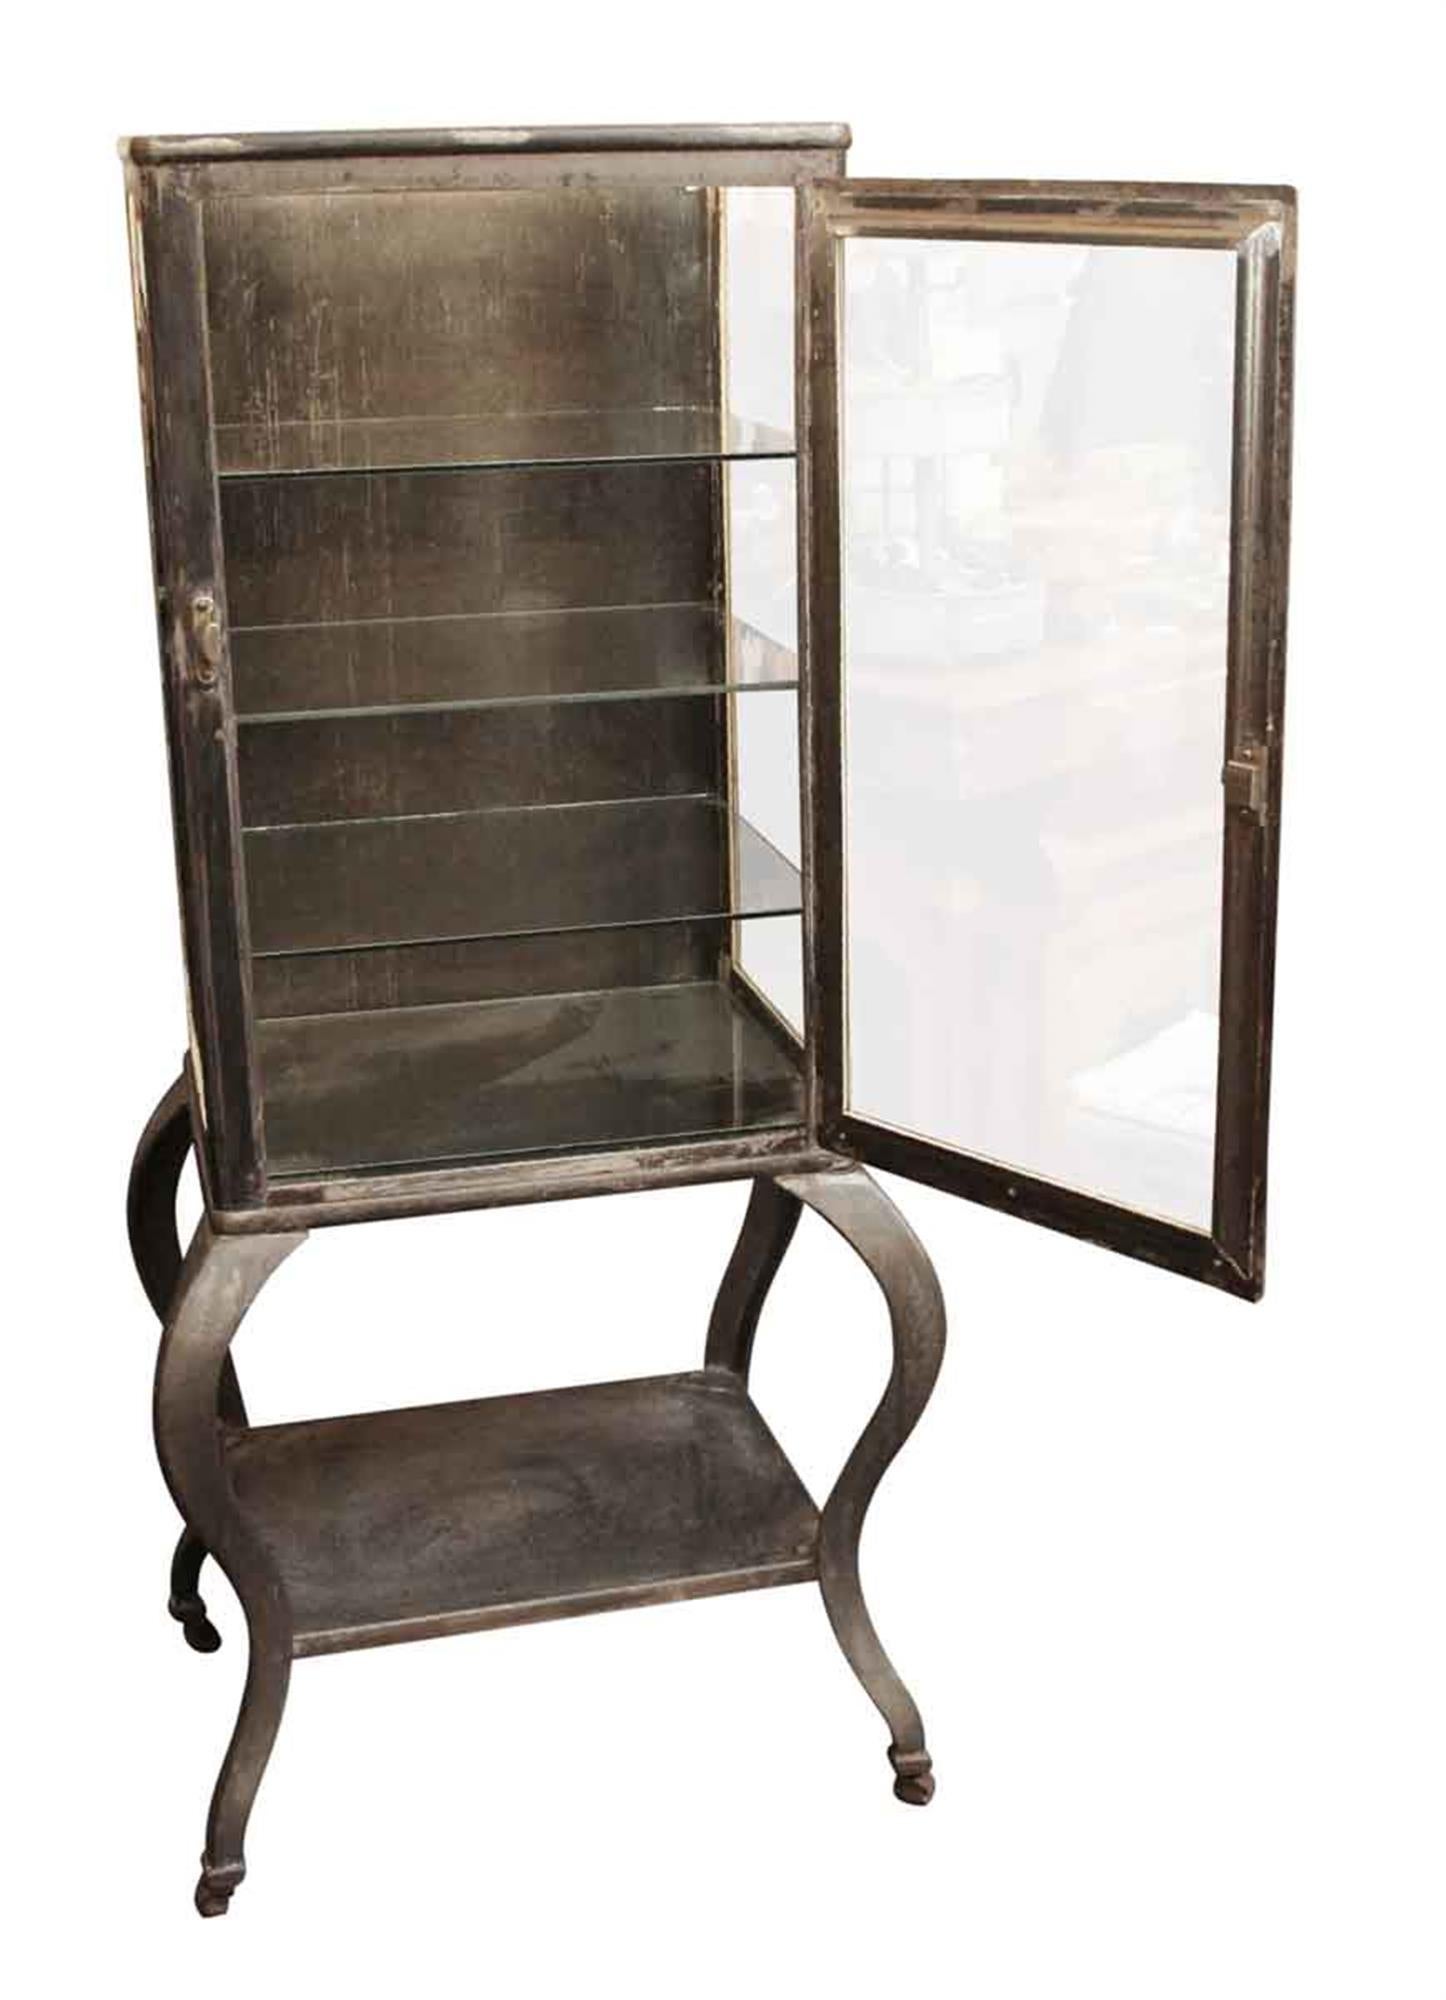 American 1930s Stripped and Lacquered Steel Medical Cabinet with Cabriole Legs